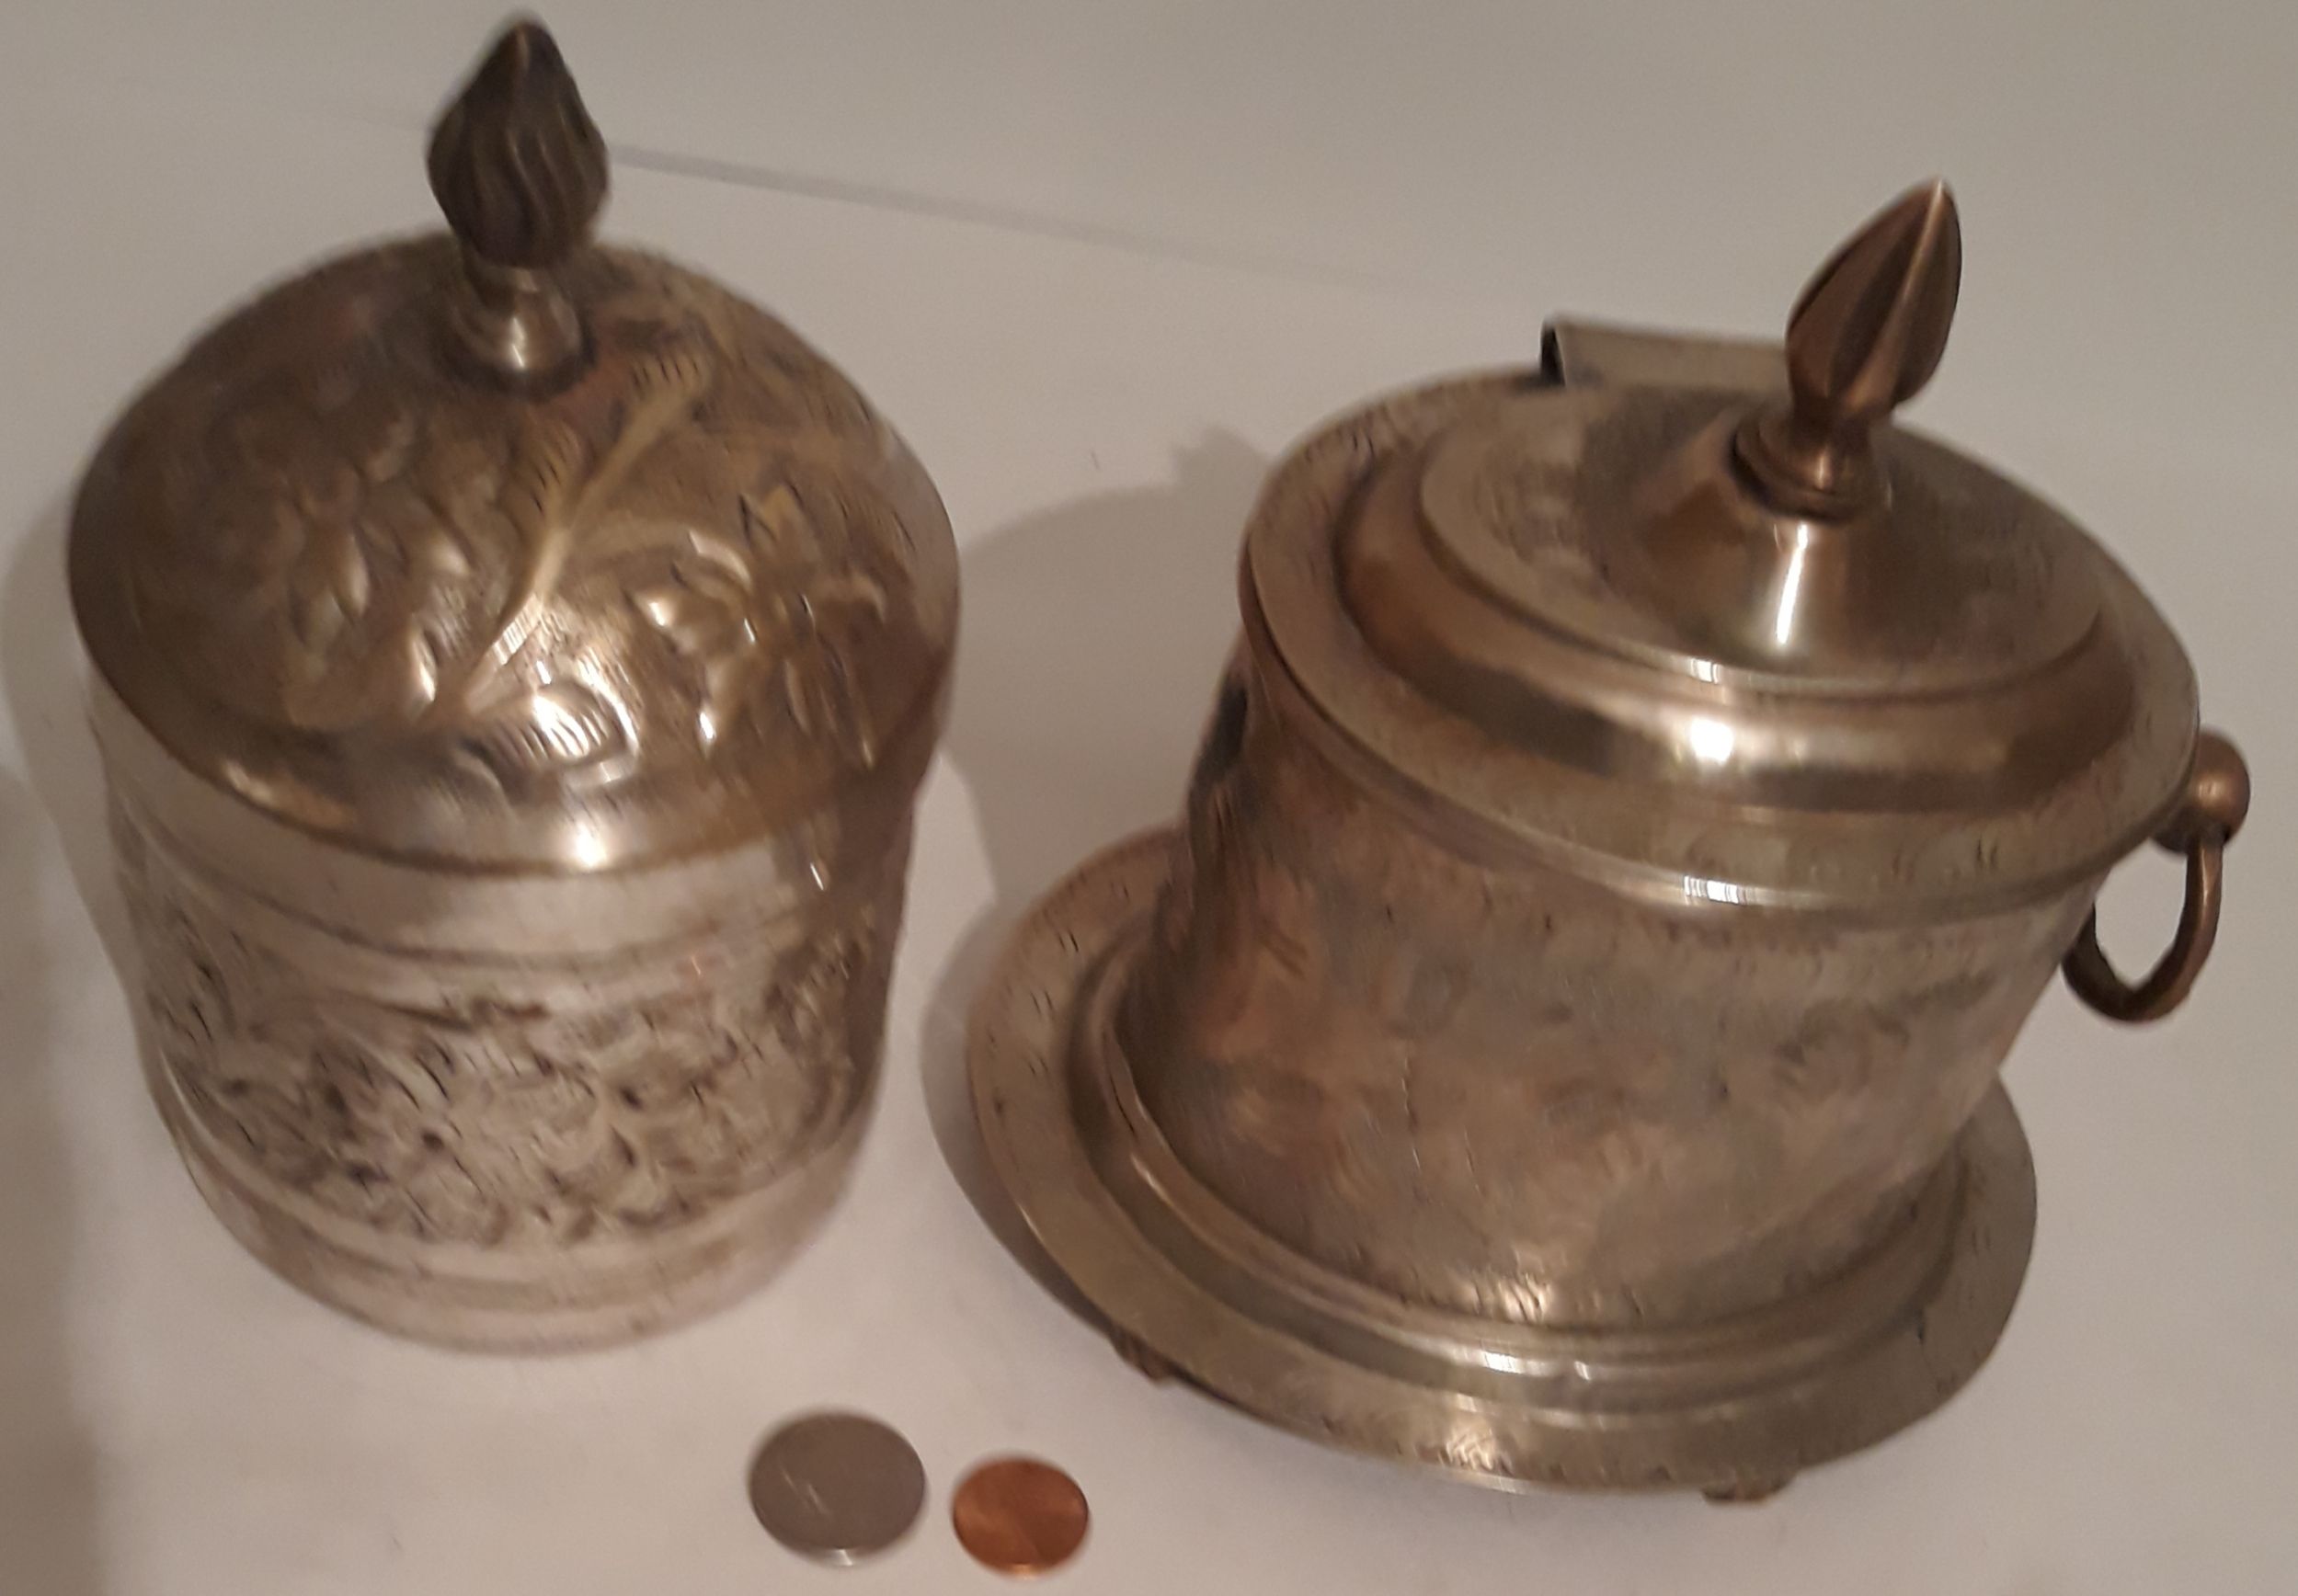 2 Vintage Silver Metal Containers, Storage Boxes, Stash Boxes, Each One of these Containers has a problem, One has a crack